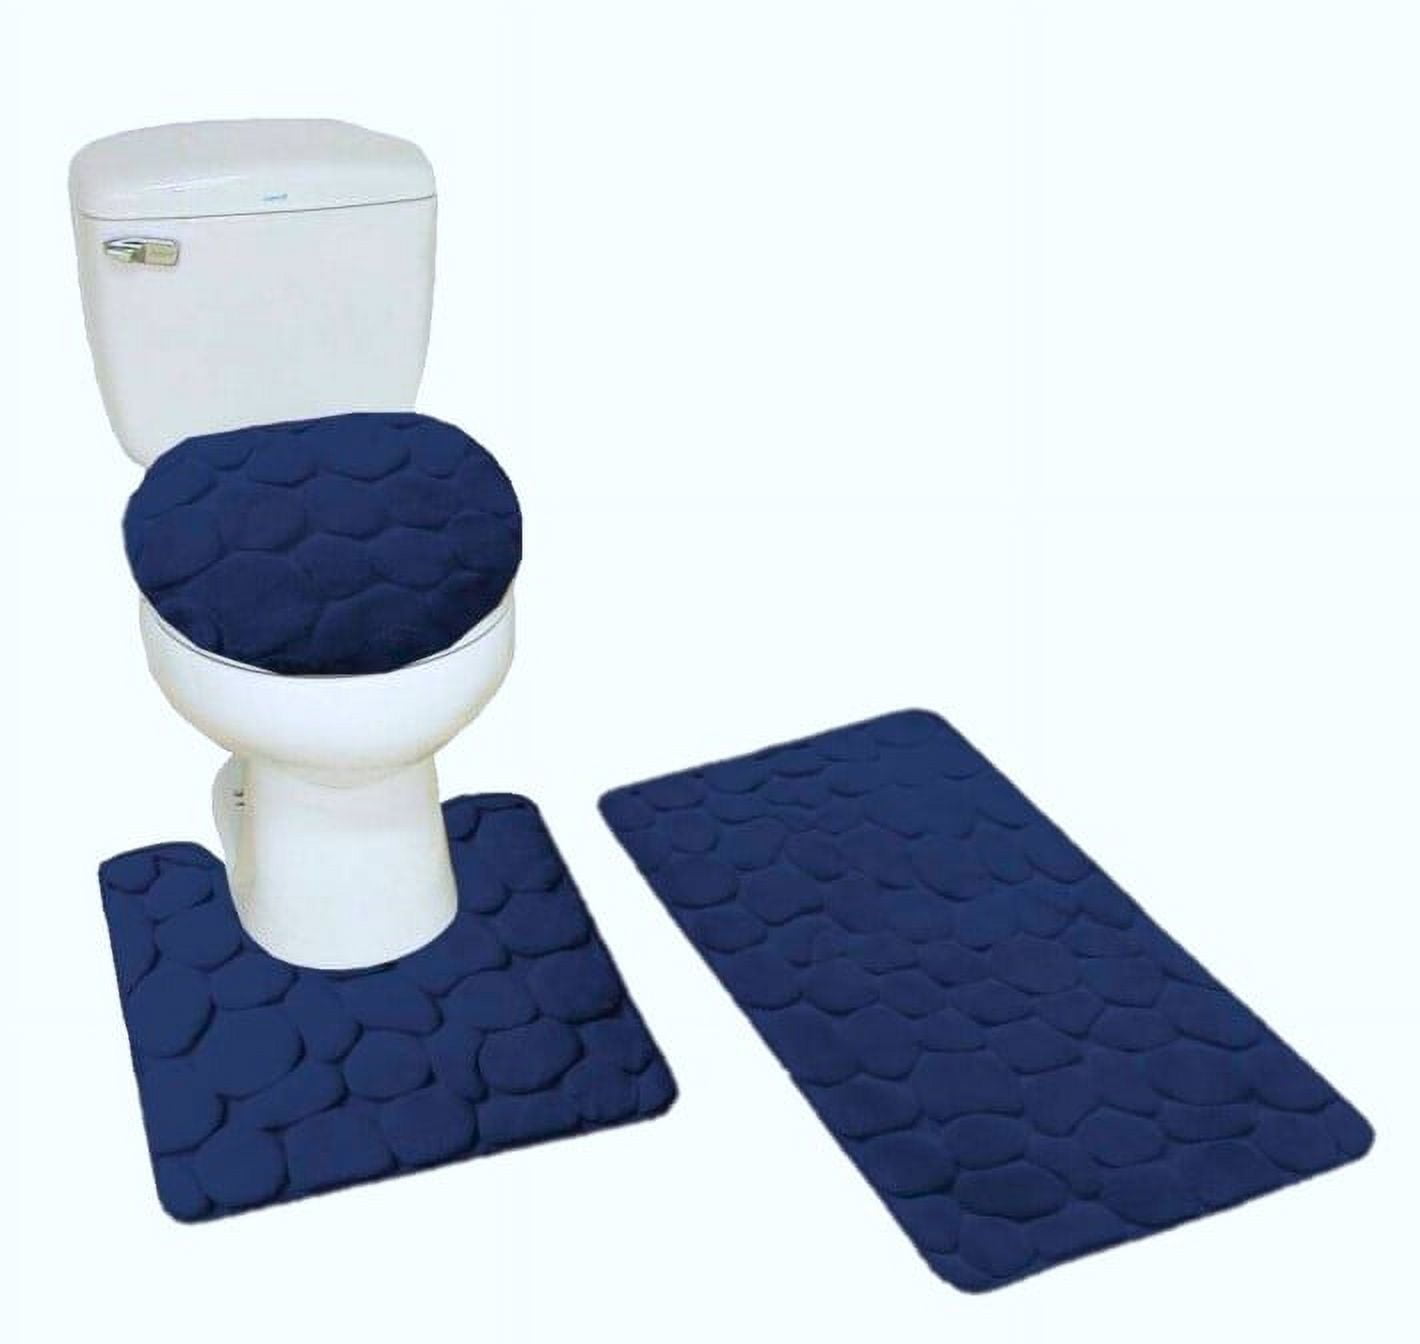 CHAPLLE Dark Blue Smoky Stage Disco Night Club Studio Theater Show Fame  Performance Dark Blue Light 3 Piece Bathroom Rugs Set Bath Rug Contour Mat  and Toilet Lid Cover 